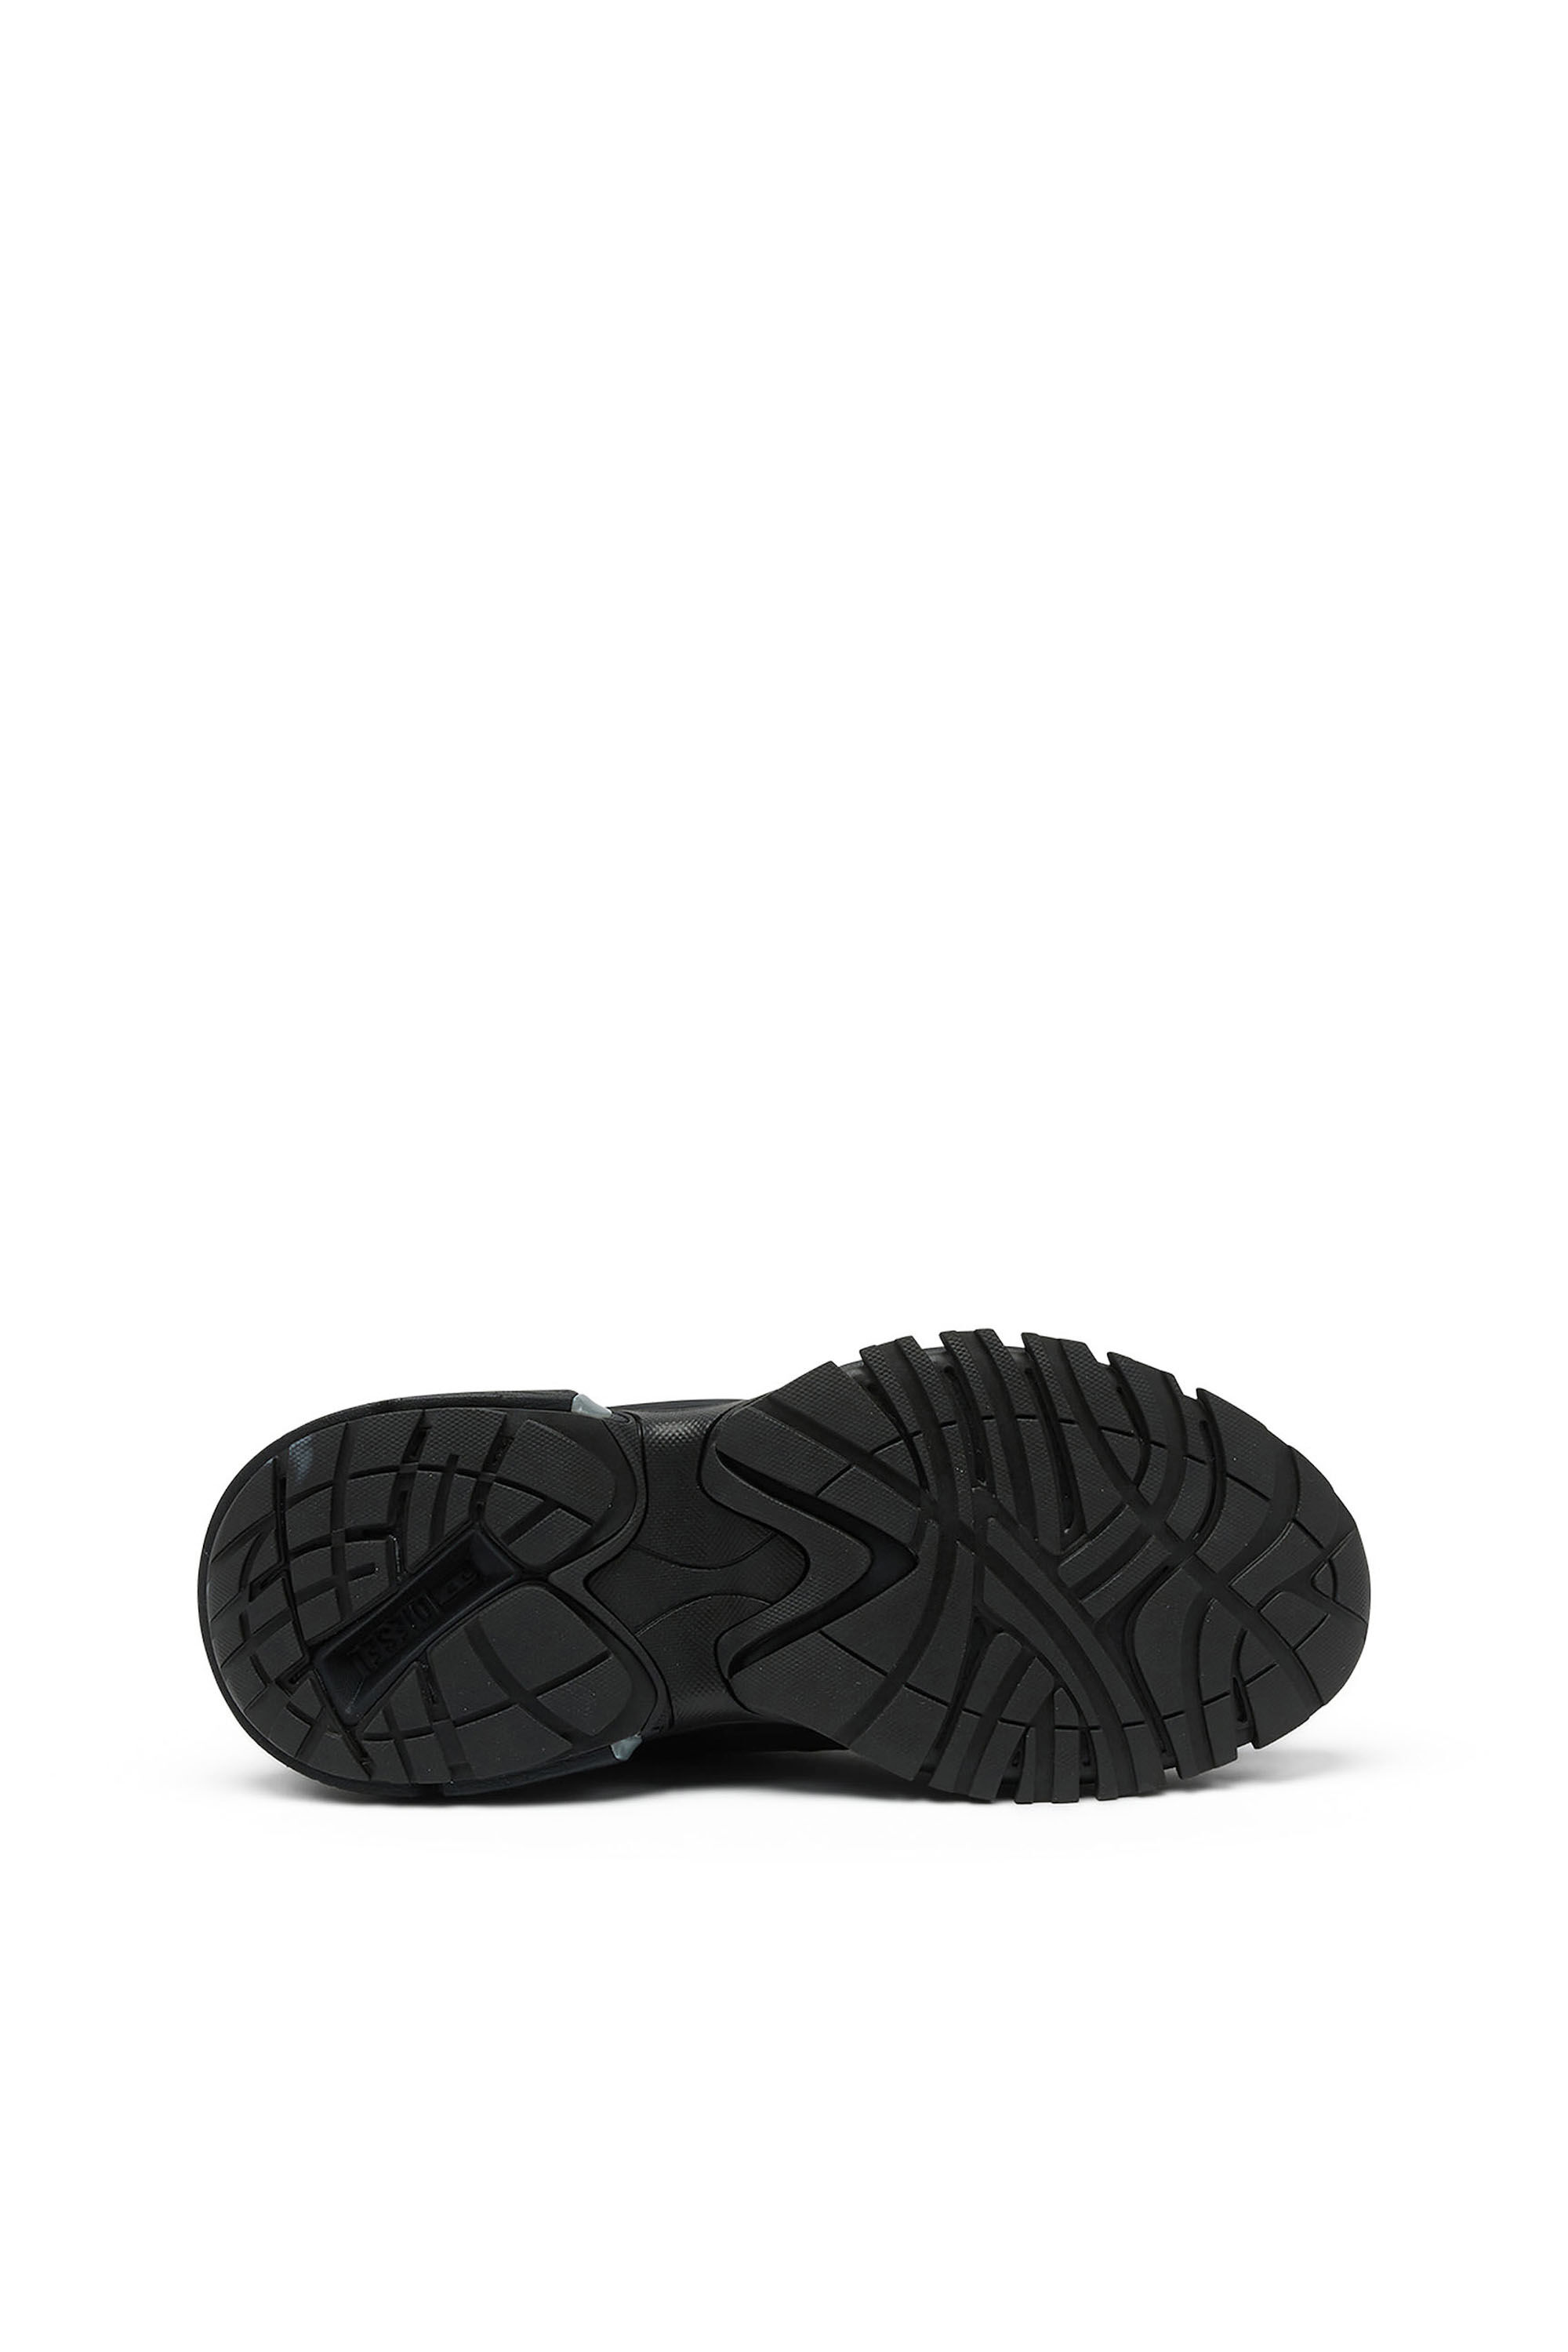 Diesel - S-SERENDIPITY PRO-X1, Man S-Serendipity-Monochrome sneakers in mesh and PU in Black - Image 5